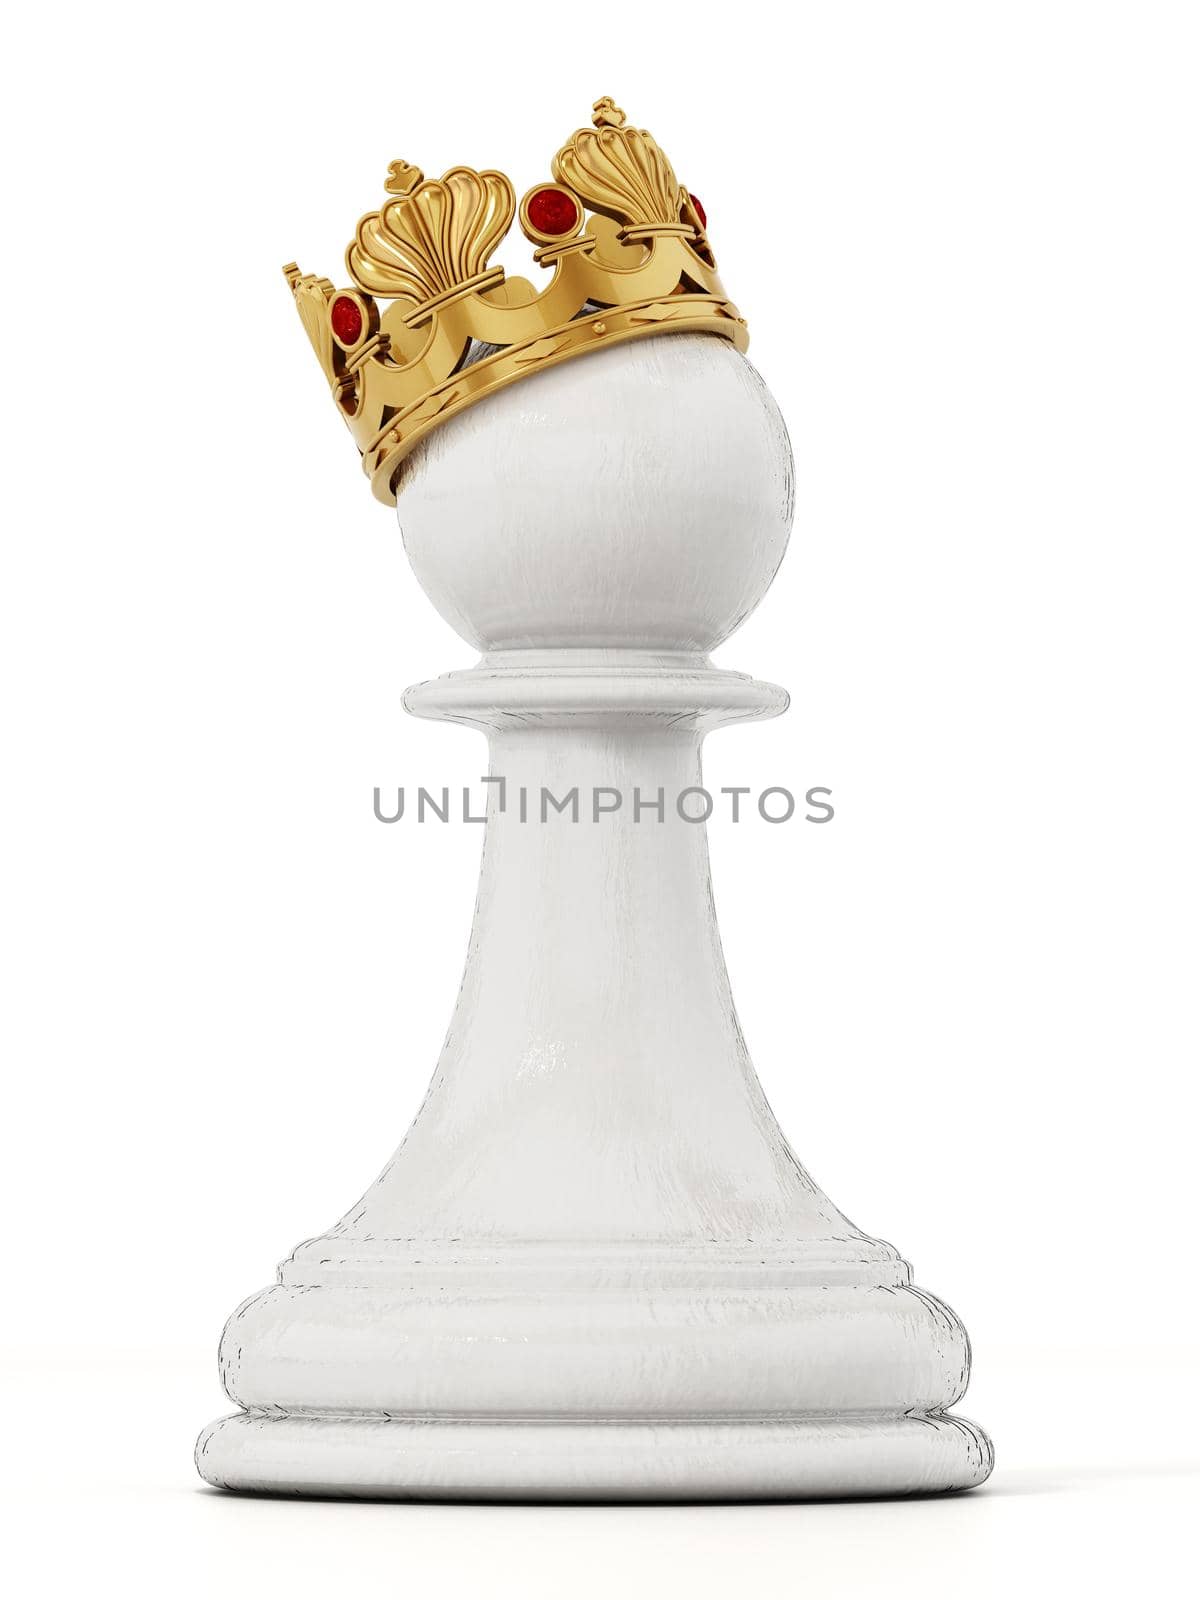 White chess pawn with golden crown. 3D illustration by Simsek